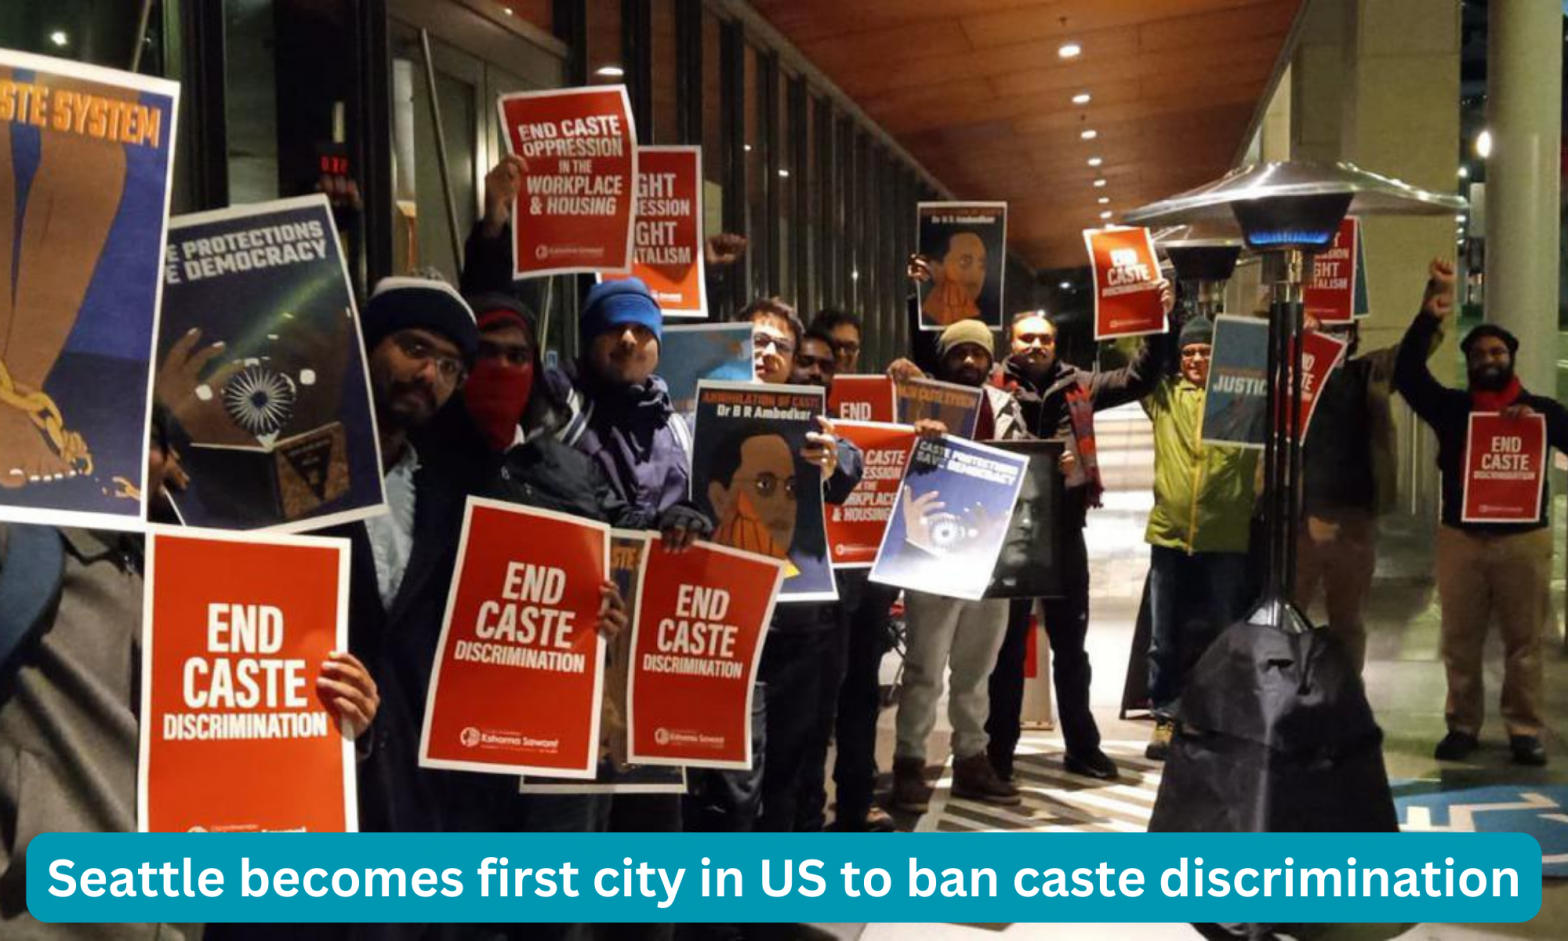 Seattle becomes first city in US to ban caste discrimination